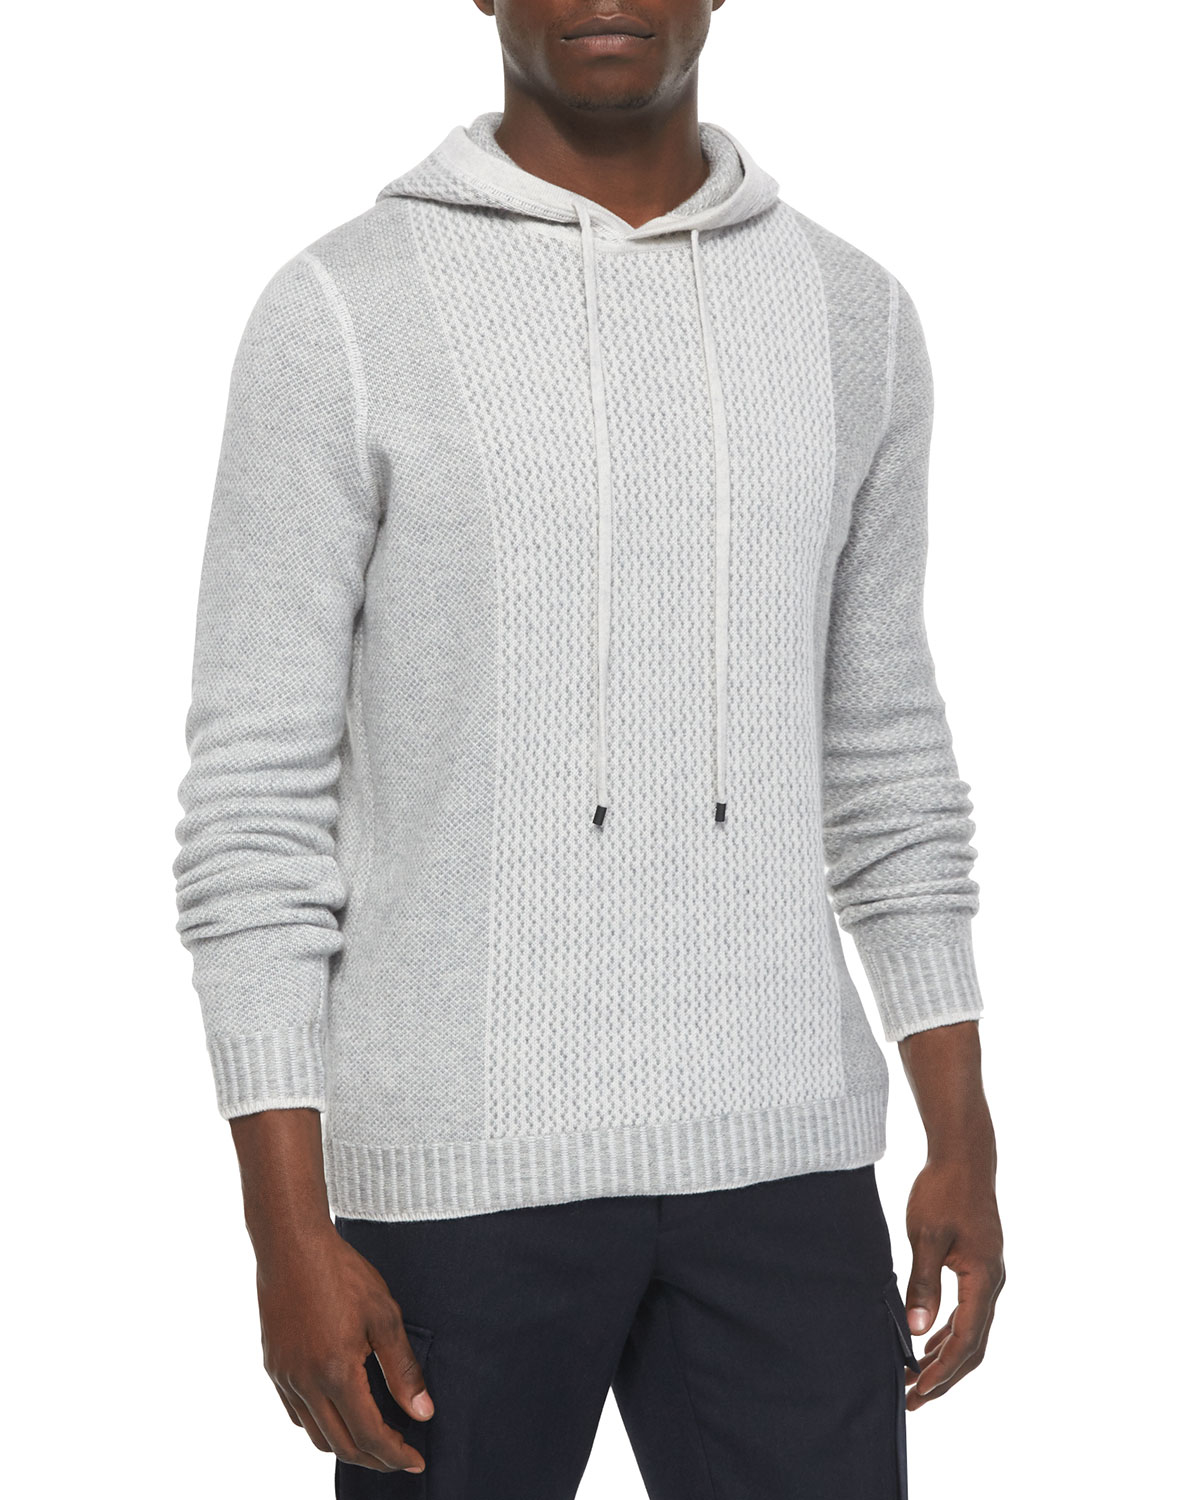 Lyst - Vince Textured Wool-blend Hoodie Sweater in White for Men